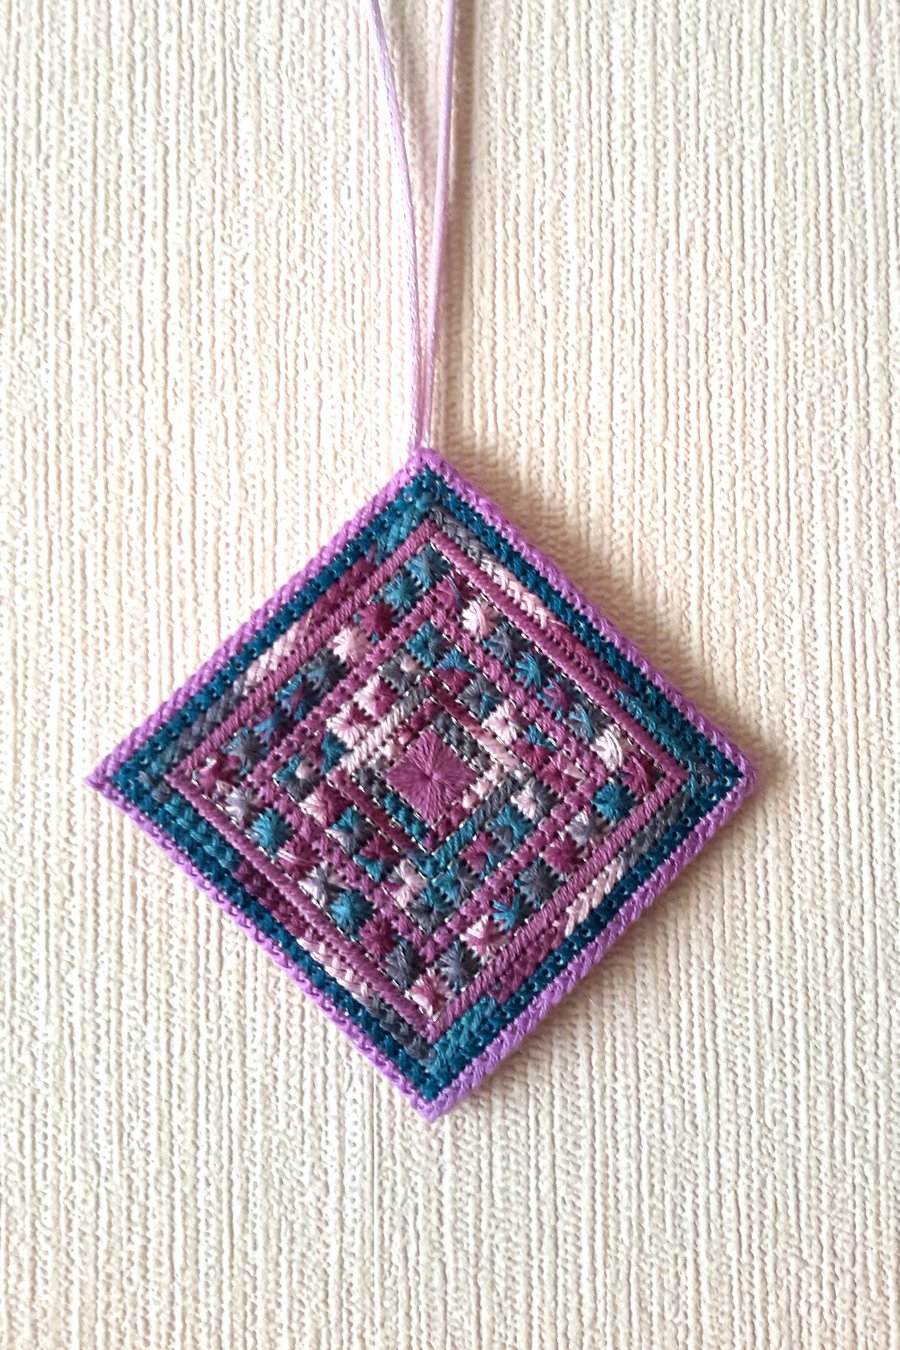 Needlepoint Wall Hanging. Hand Embroidered Decorative Tile, Hanging decoration